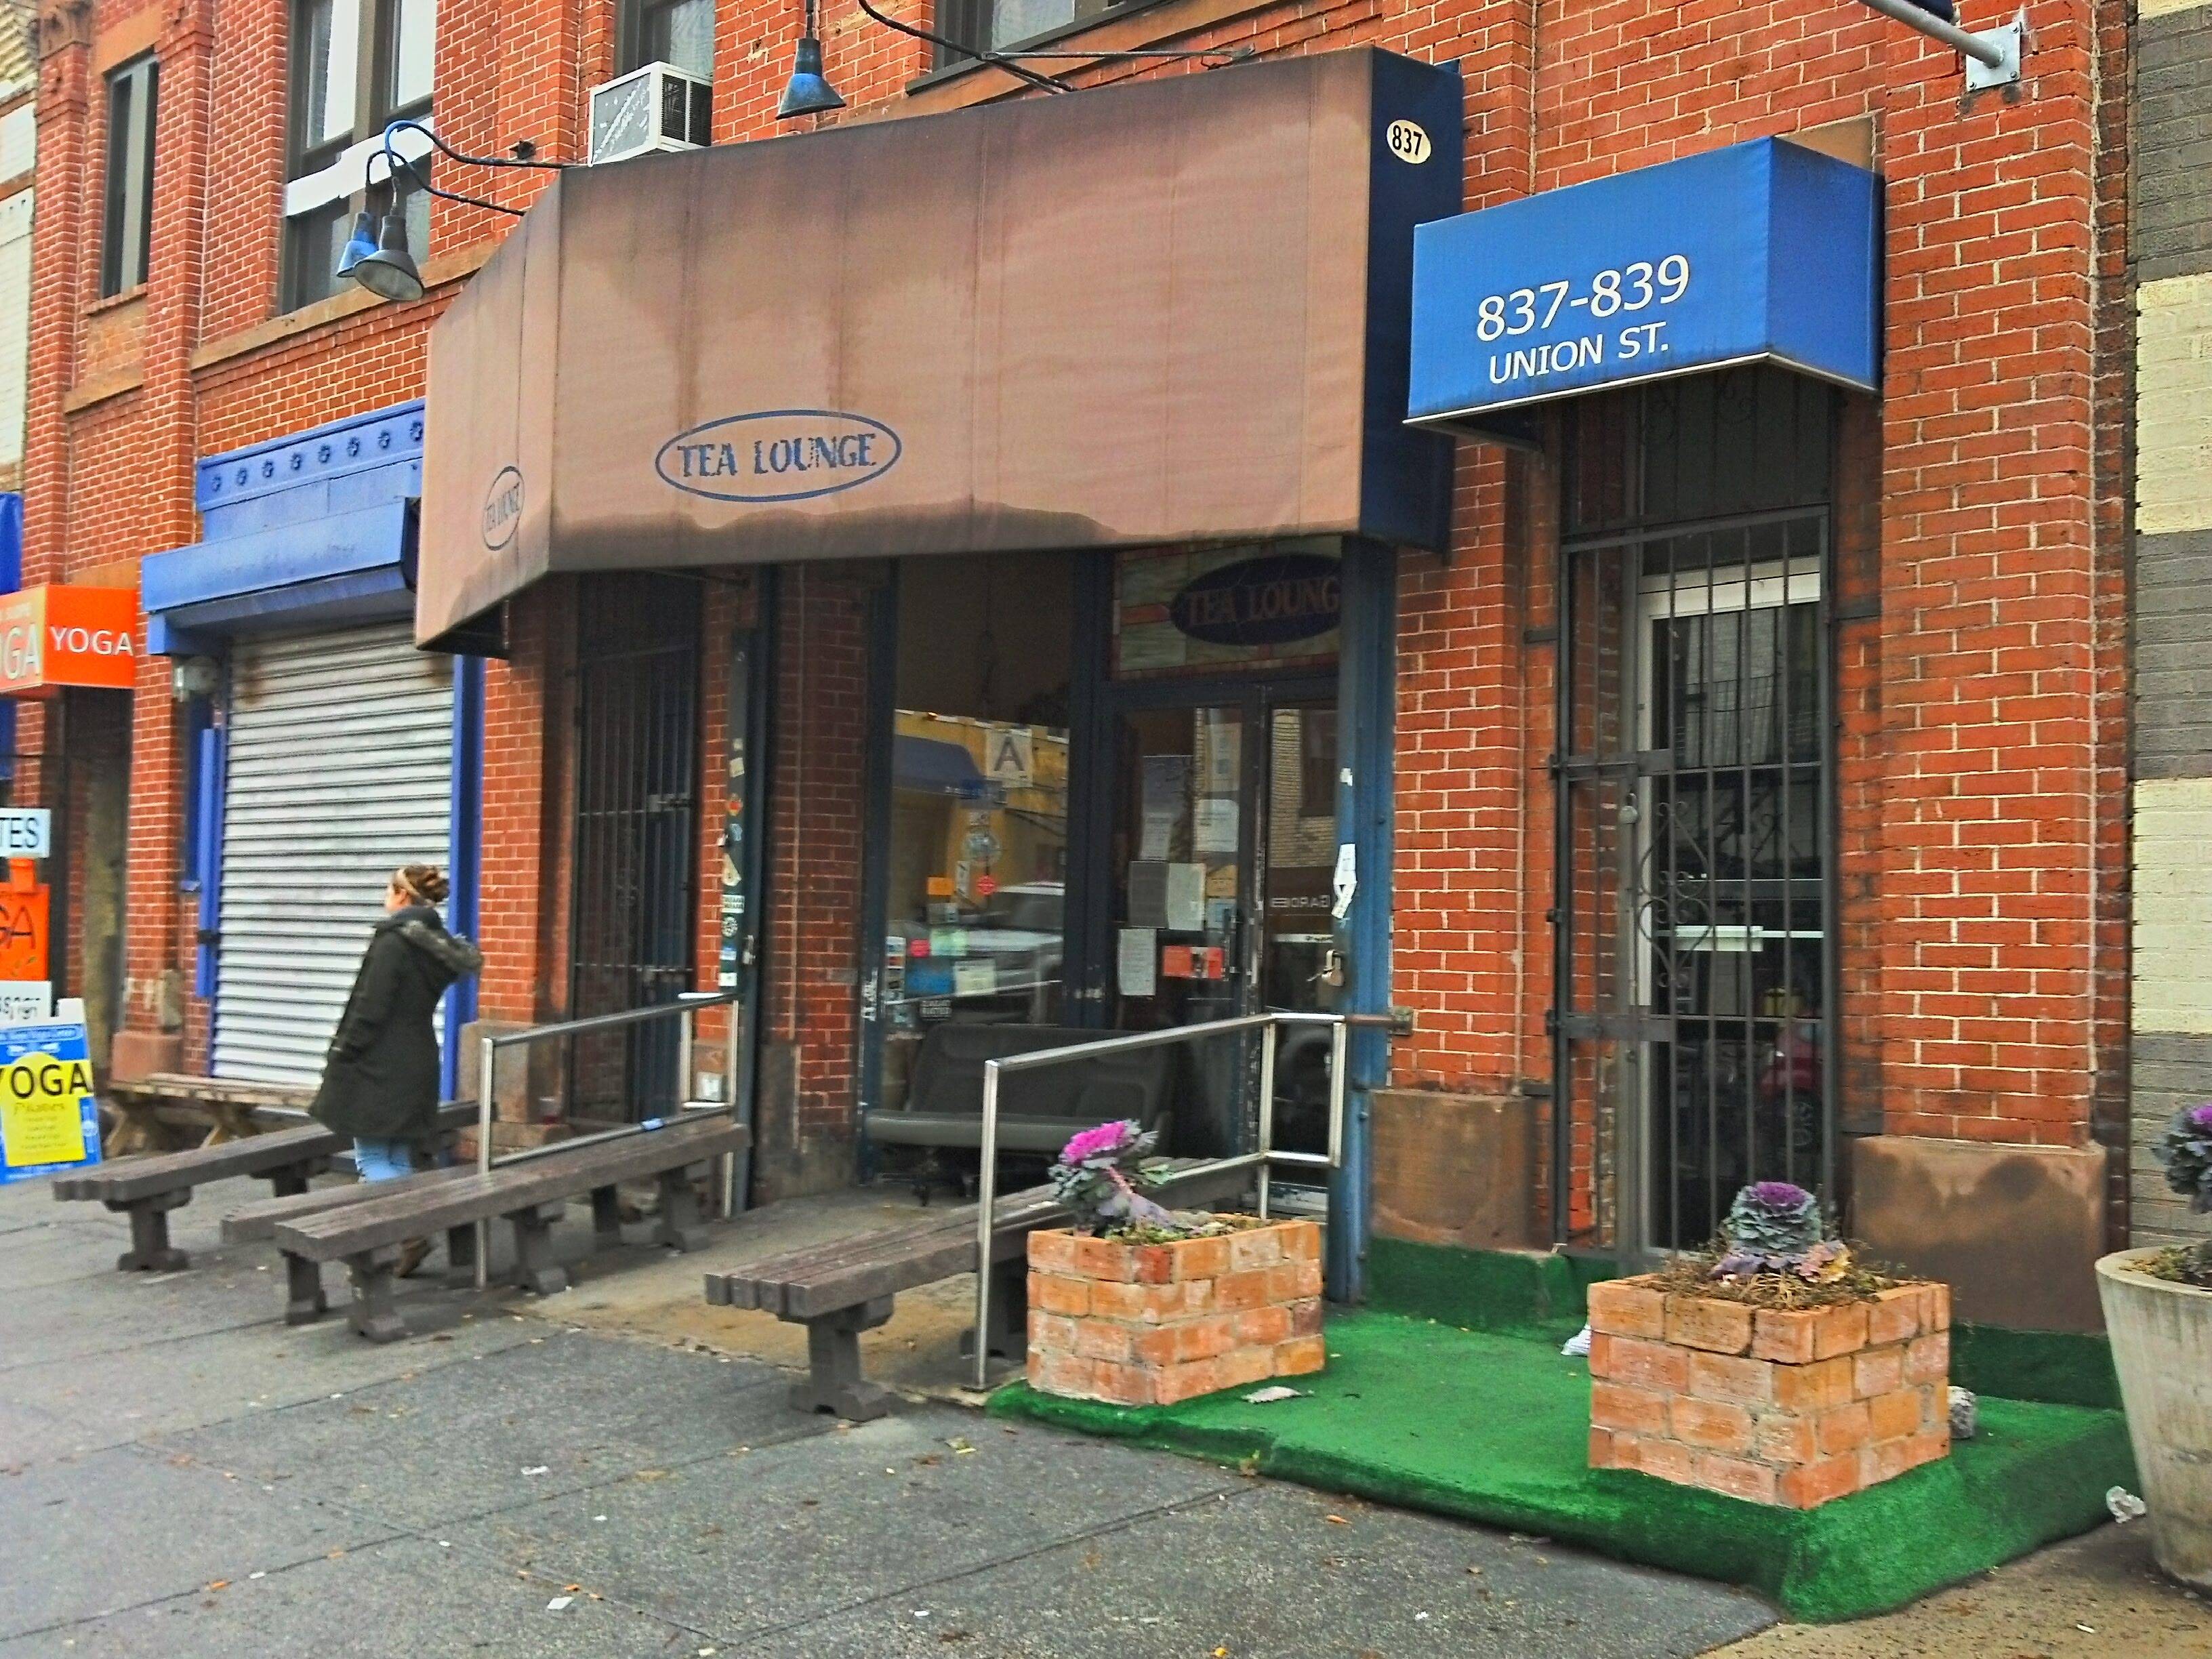 Park Slope commercial space for lease - PRIME business location - unrivaled foot-traffic